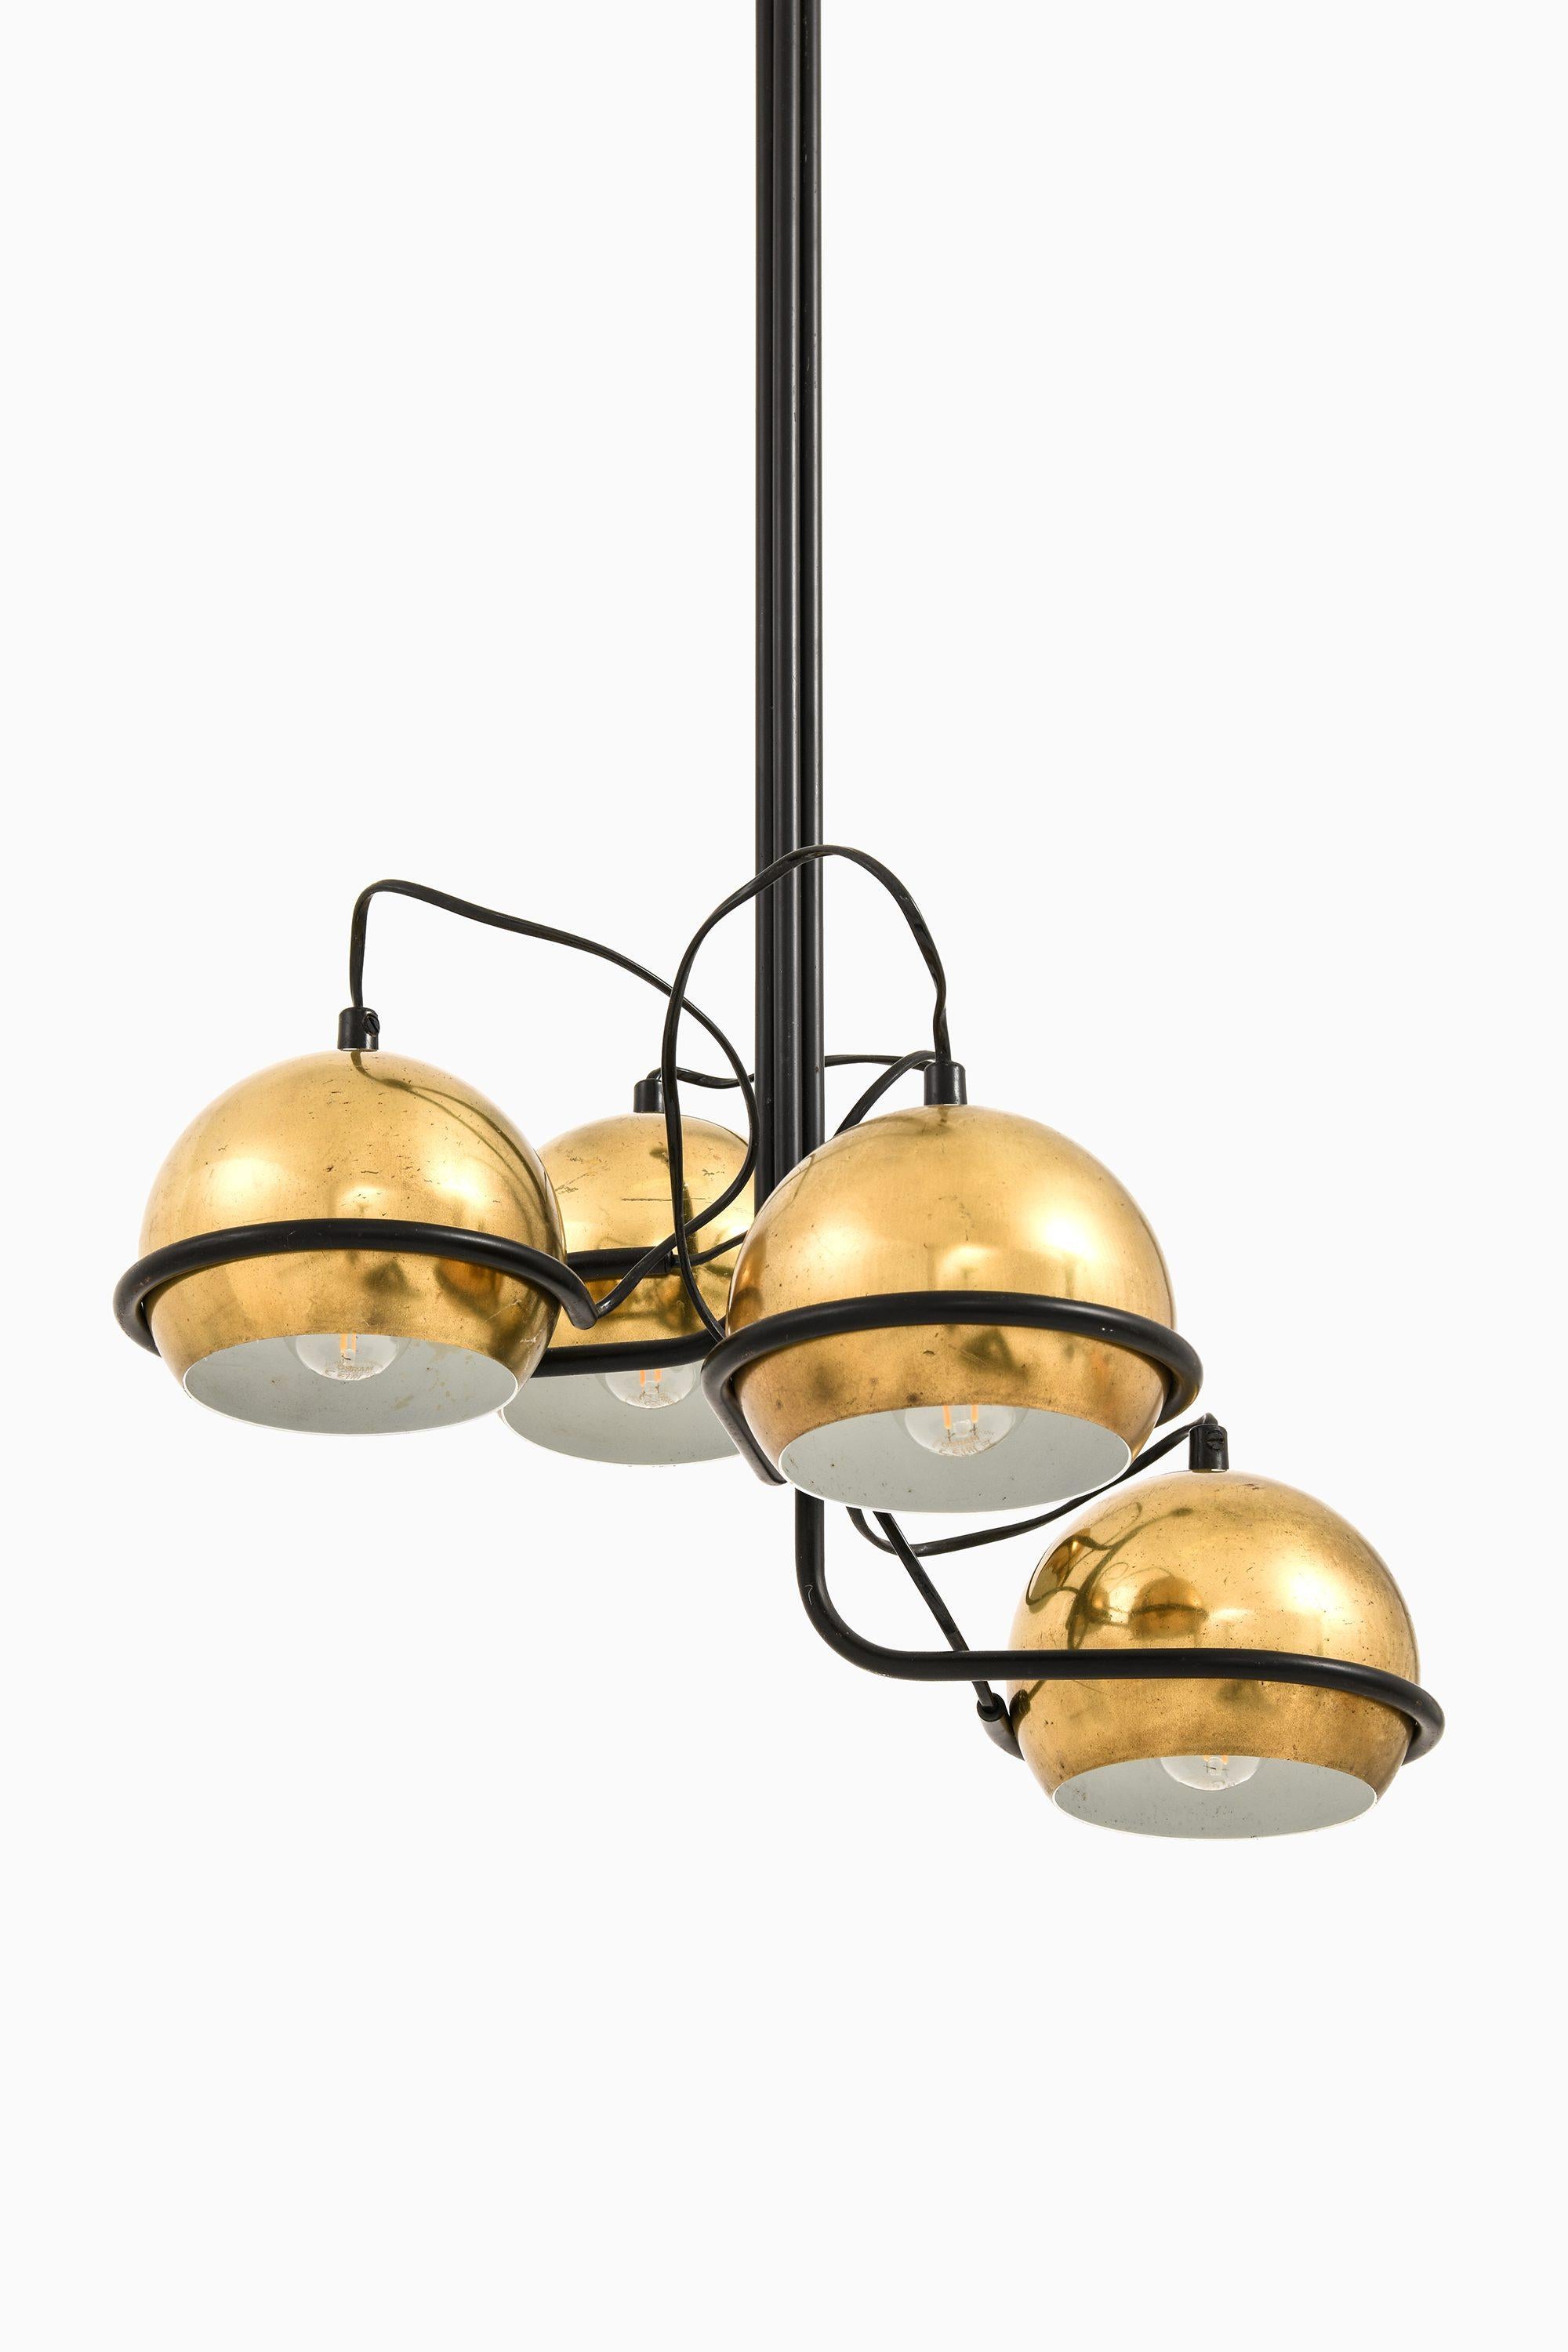 Ceiling Lamp in Black Lacquered Metal and Brass, 1960's

Additional Information:
Material: Black lacquered metal, brass
Style: Mid century, Scandinavian
Ceiling lamp model Polaris
Produced by Aris Oy in Finland
Dimensions (W x D x H): 43 x 43 x 93